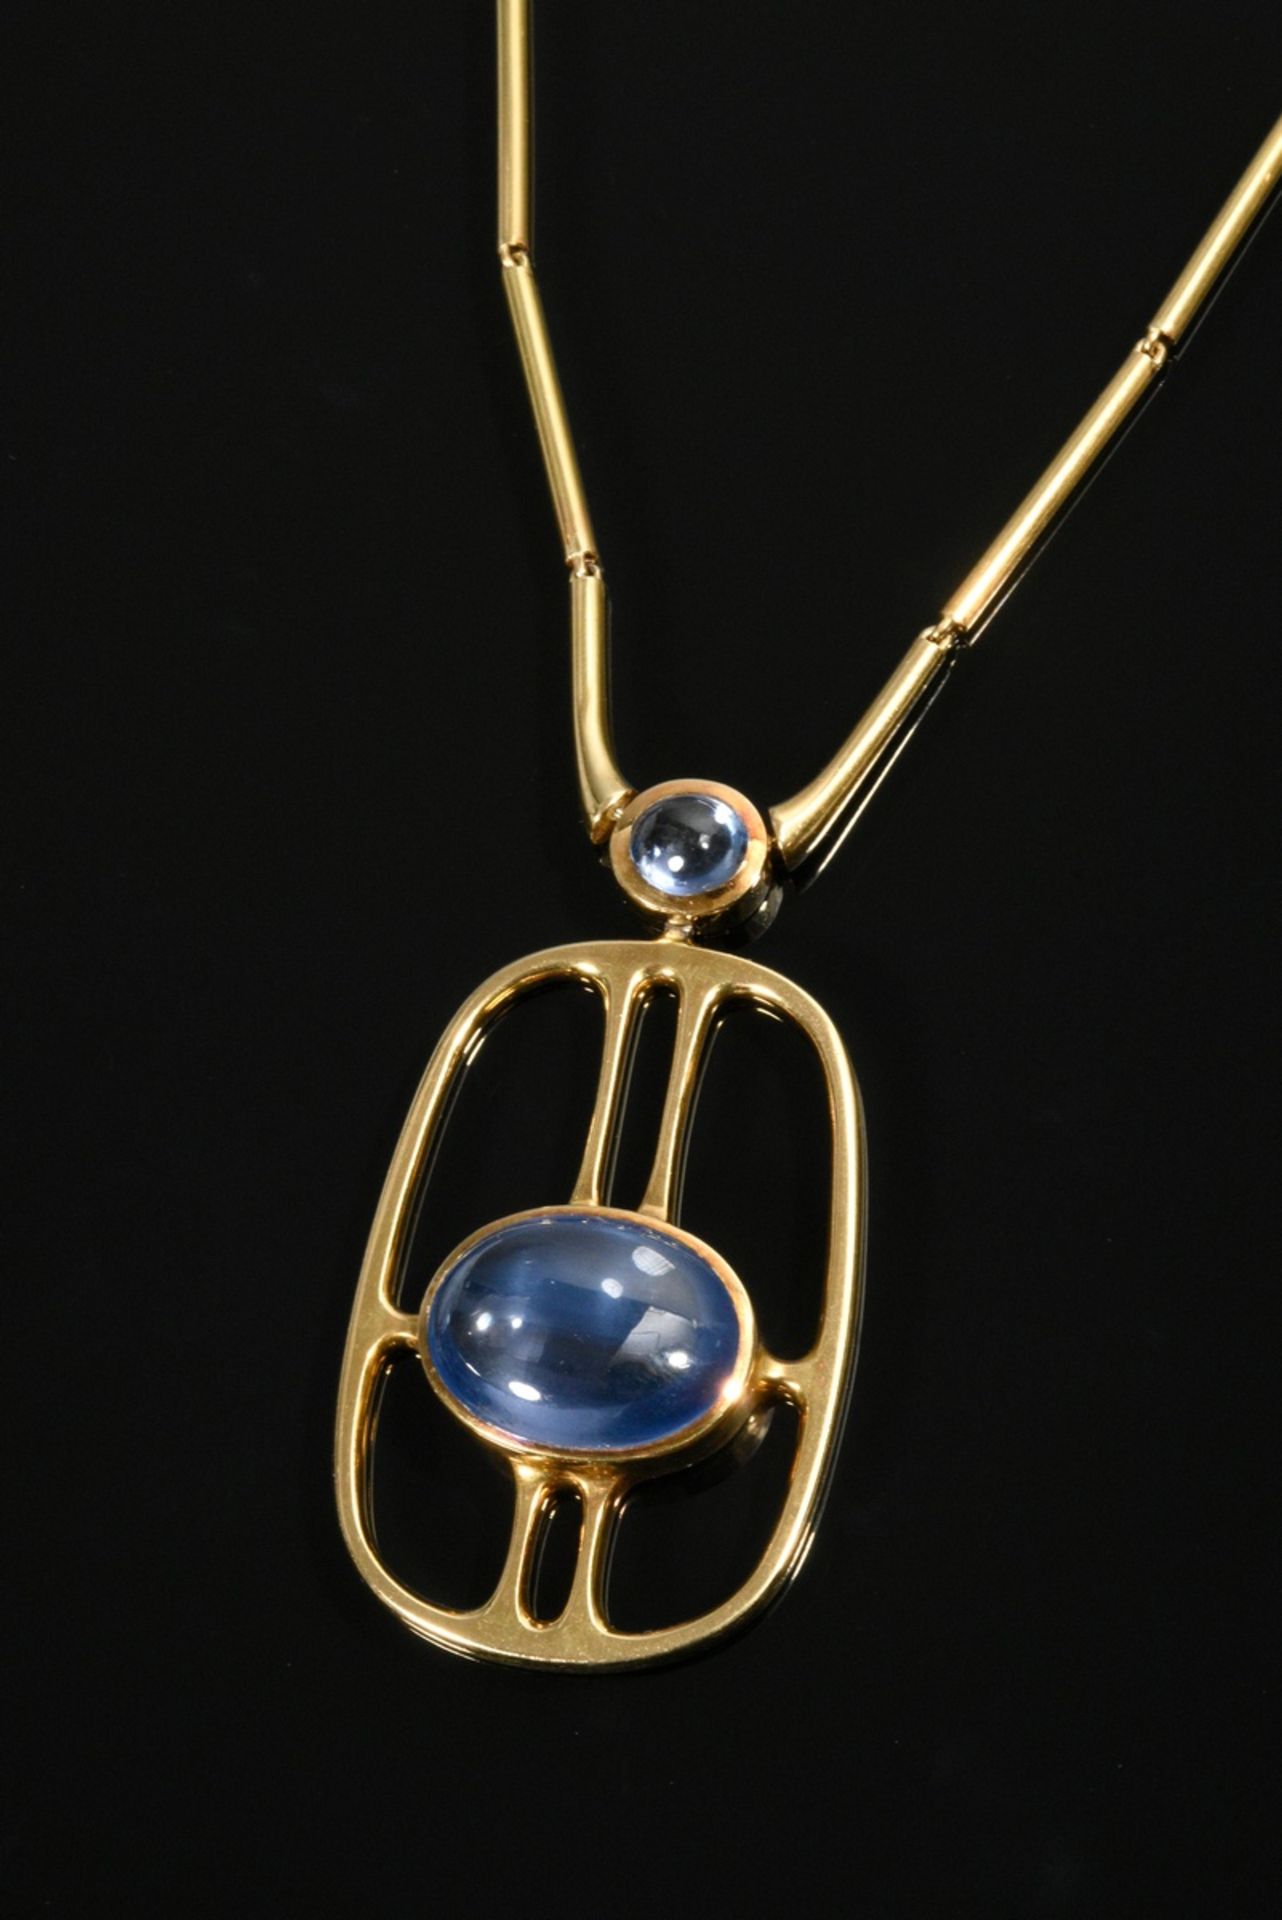 Exceptional modern yellow gold 750 bar necklace with 3 sapphire cabochons (approx. 0.85, 3.36 and 2